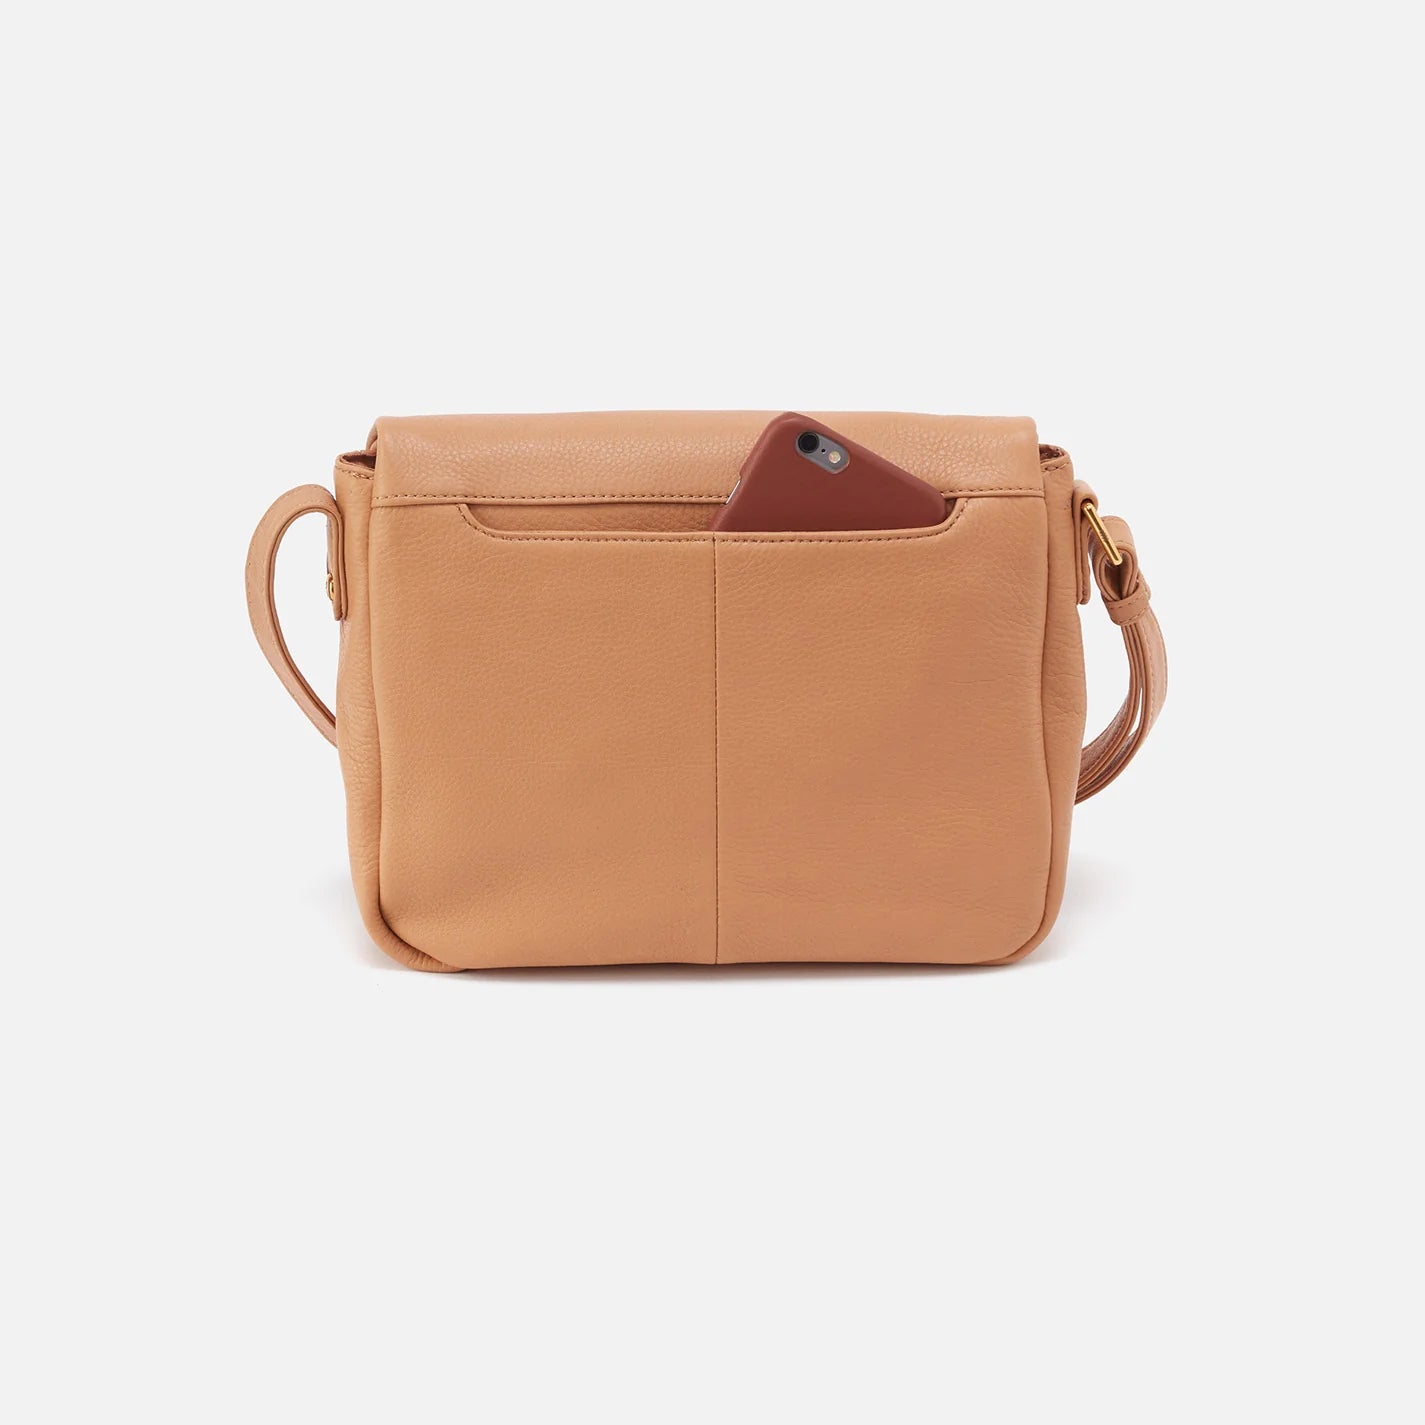 The Fern Messenger Bag in sandstorm by HOBO has two interior compartments for organization, an adjustable crossbody strap and an exterior slip pocket for your phone. Check it out at the Painted Cottage in Edgewater, MD